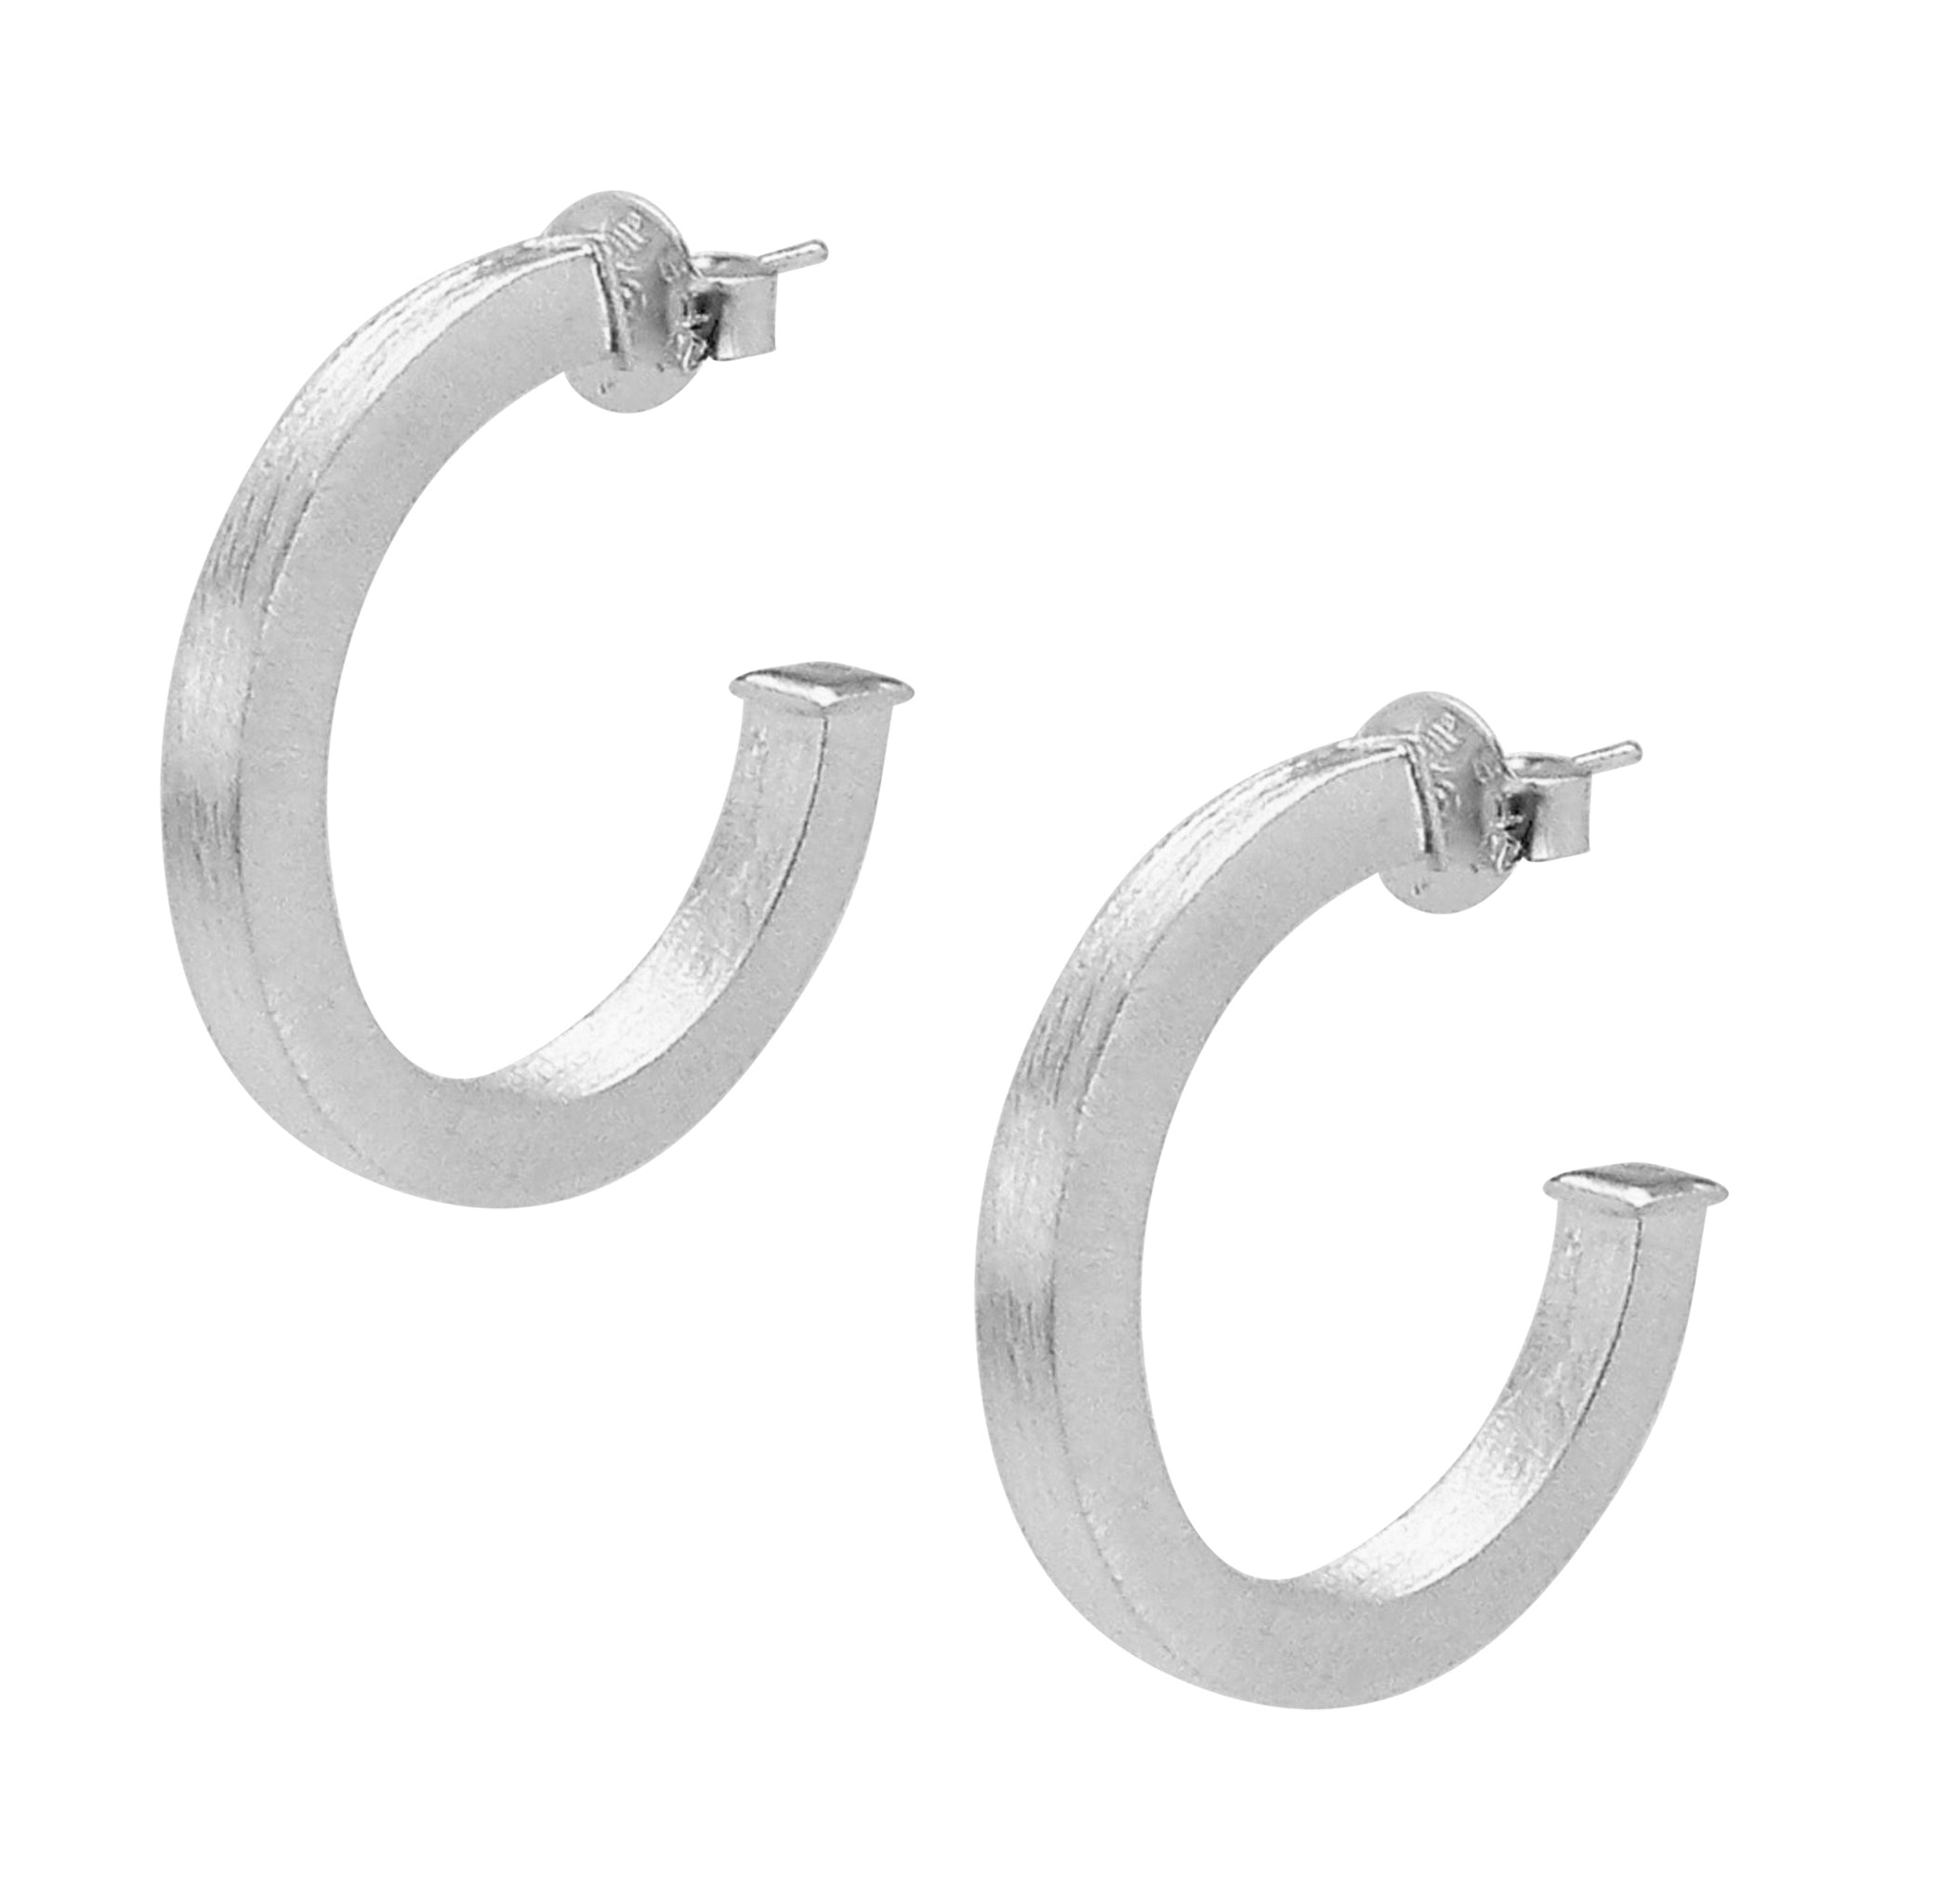 Pair of Sheila Fajl Ilana Bold Square Tube Hoop Earrings in Silver Plated